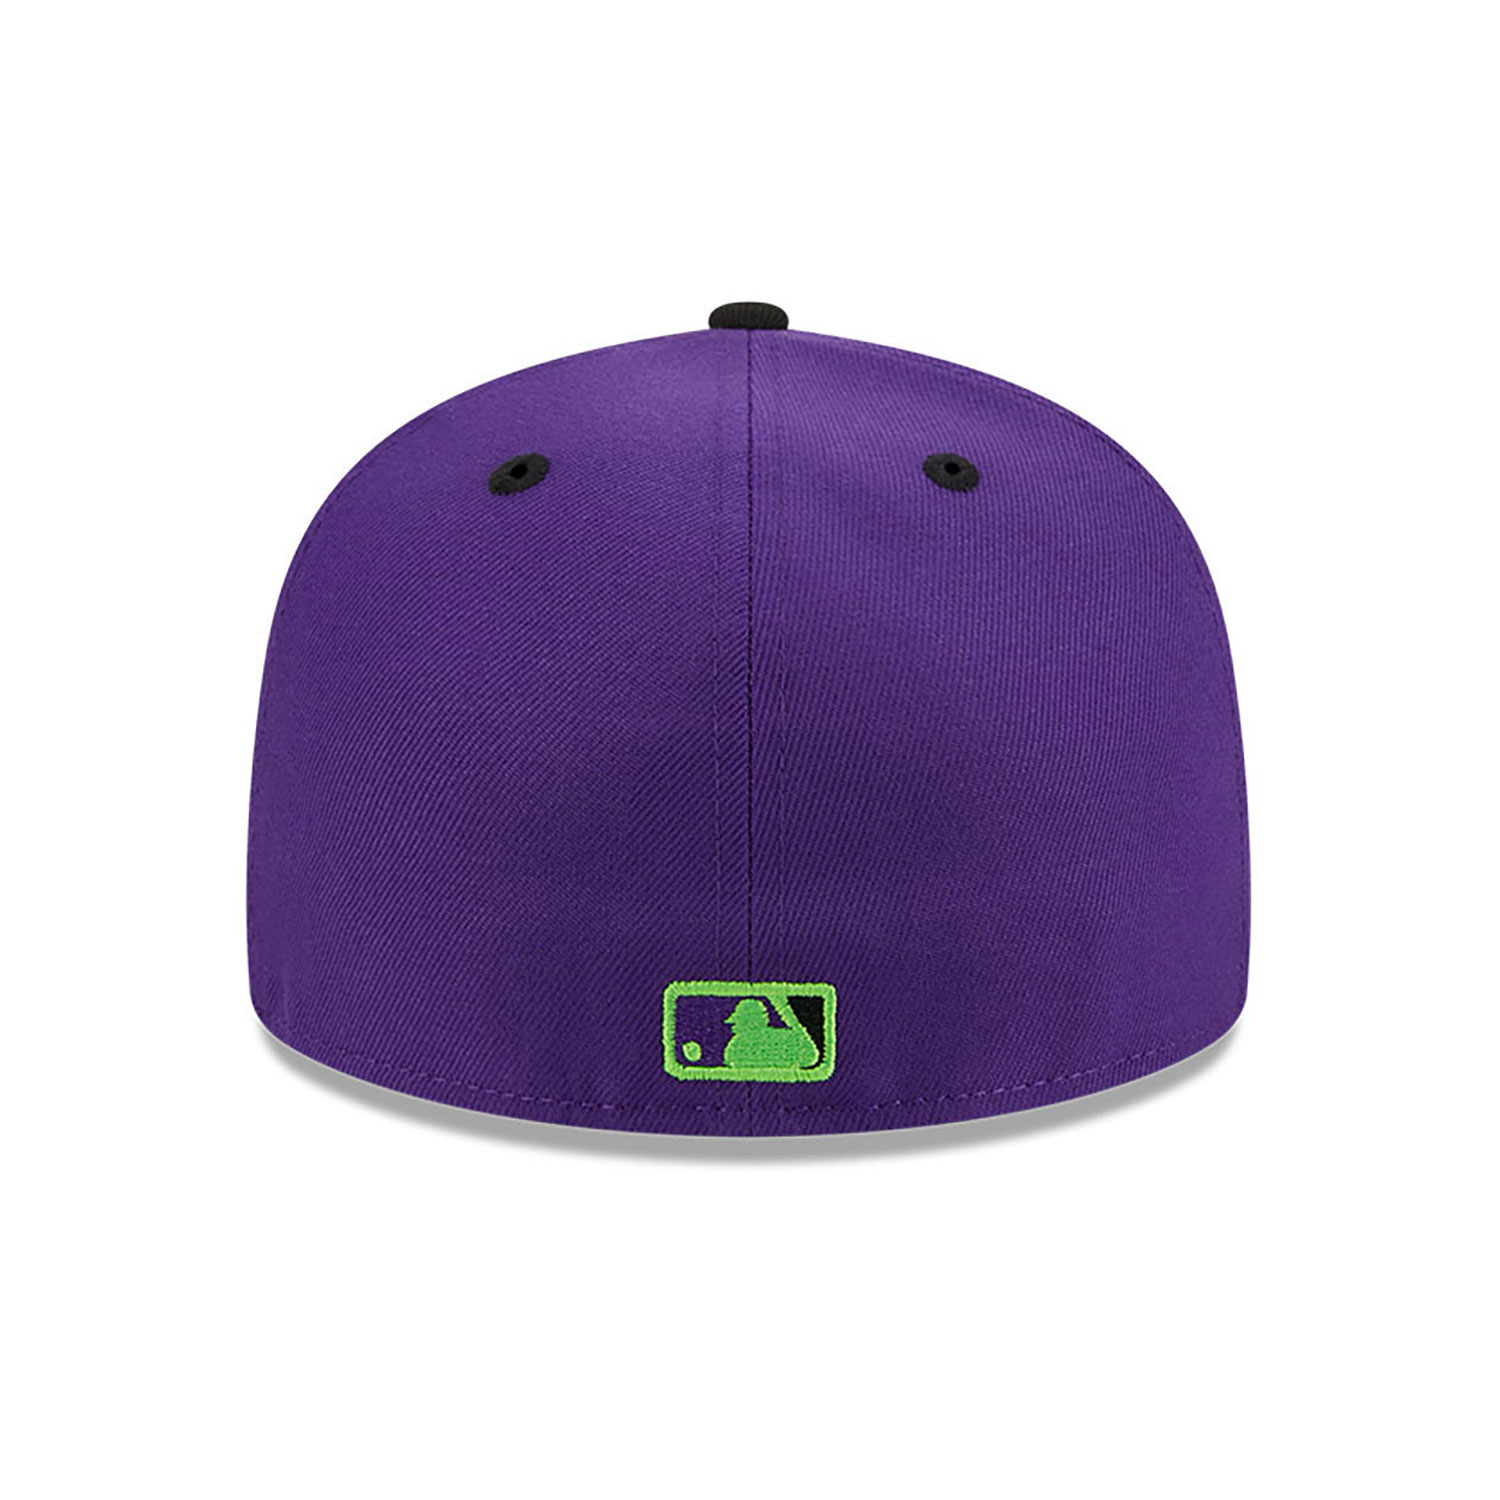 New York Yankees Trick Or Treat Purple 59FIFTY Fitted Cap